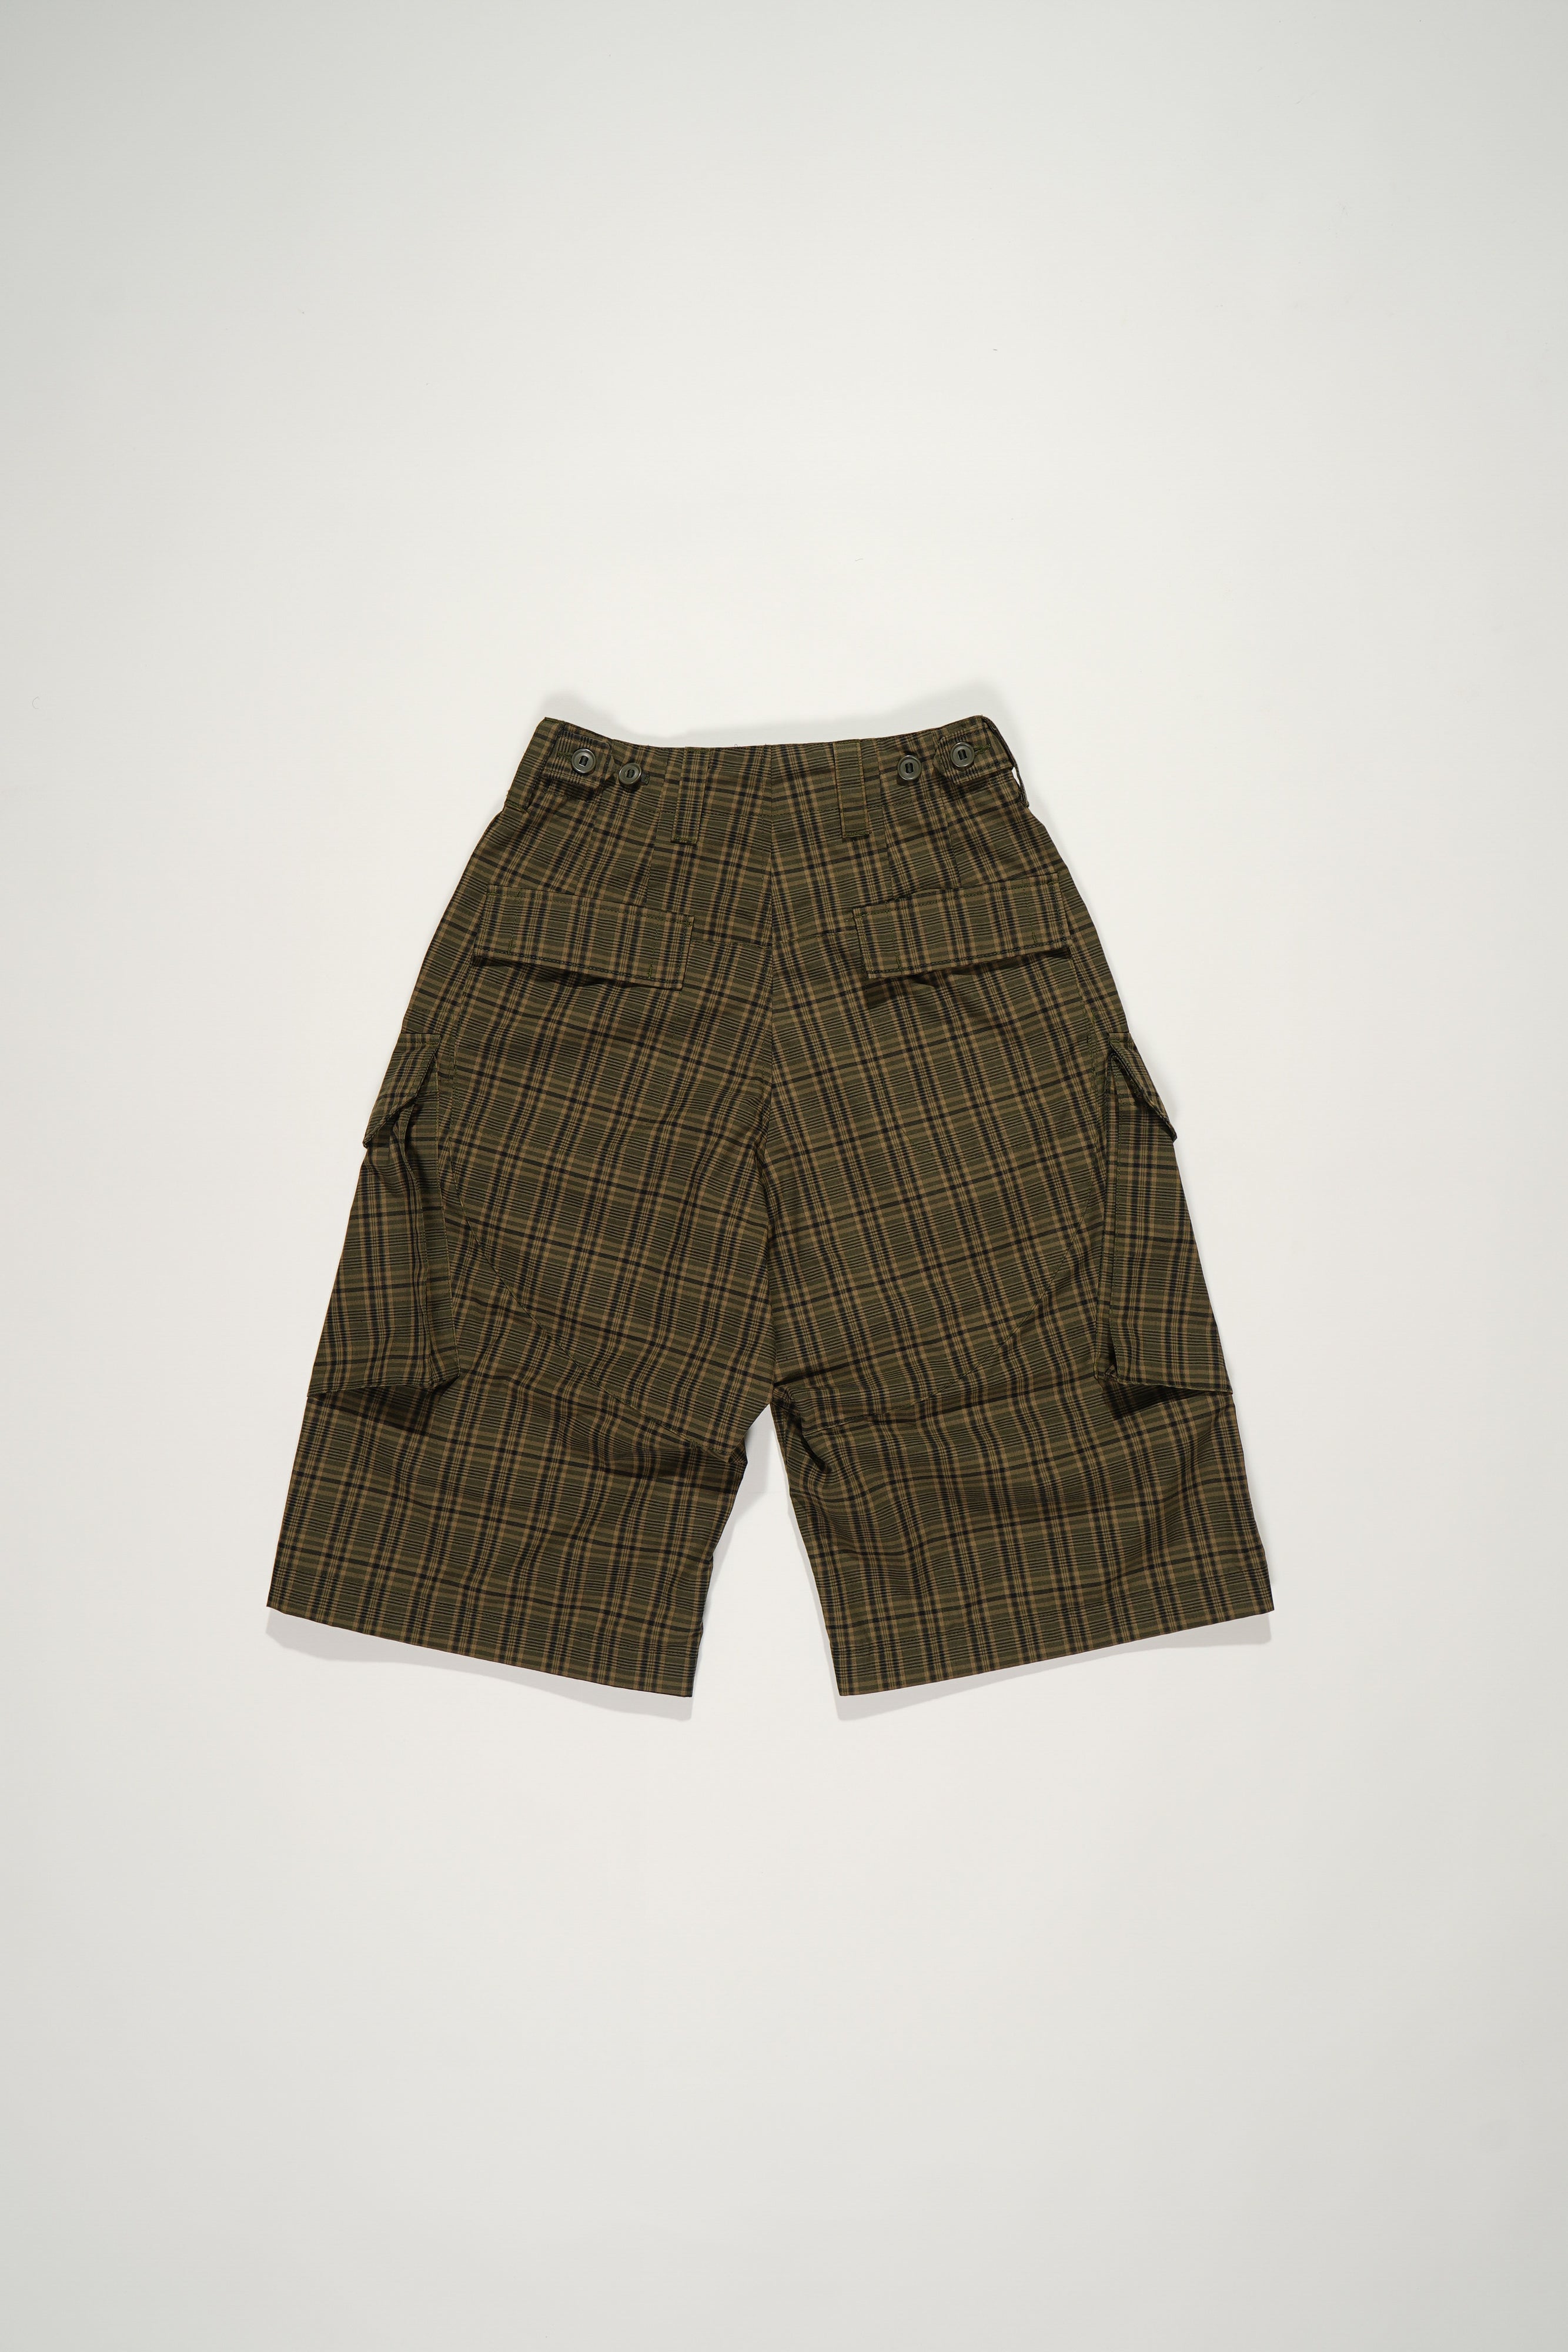 Engineered Garments Blank Label Royal Gaucho Pants - Olive Poly Cotton Small Plaid